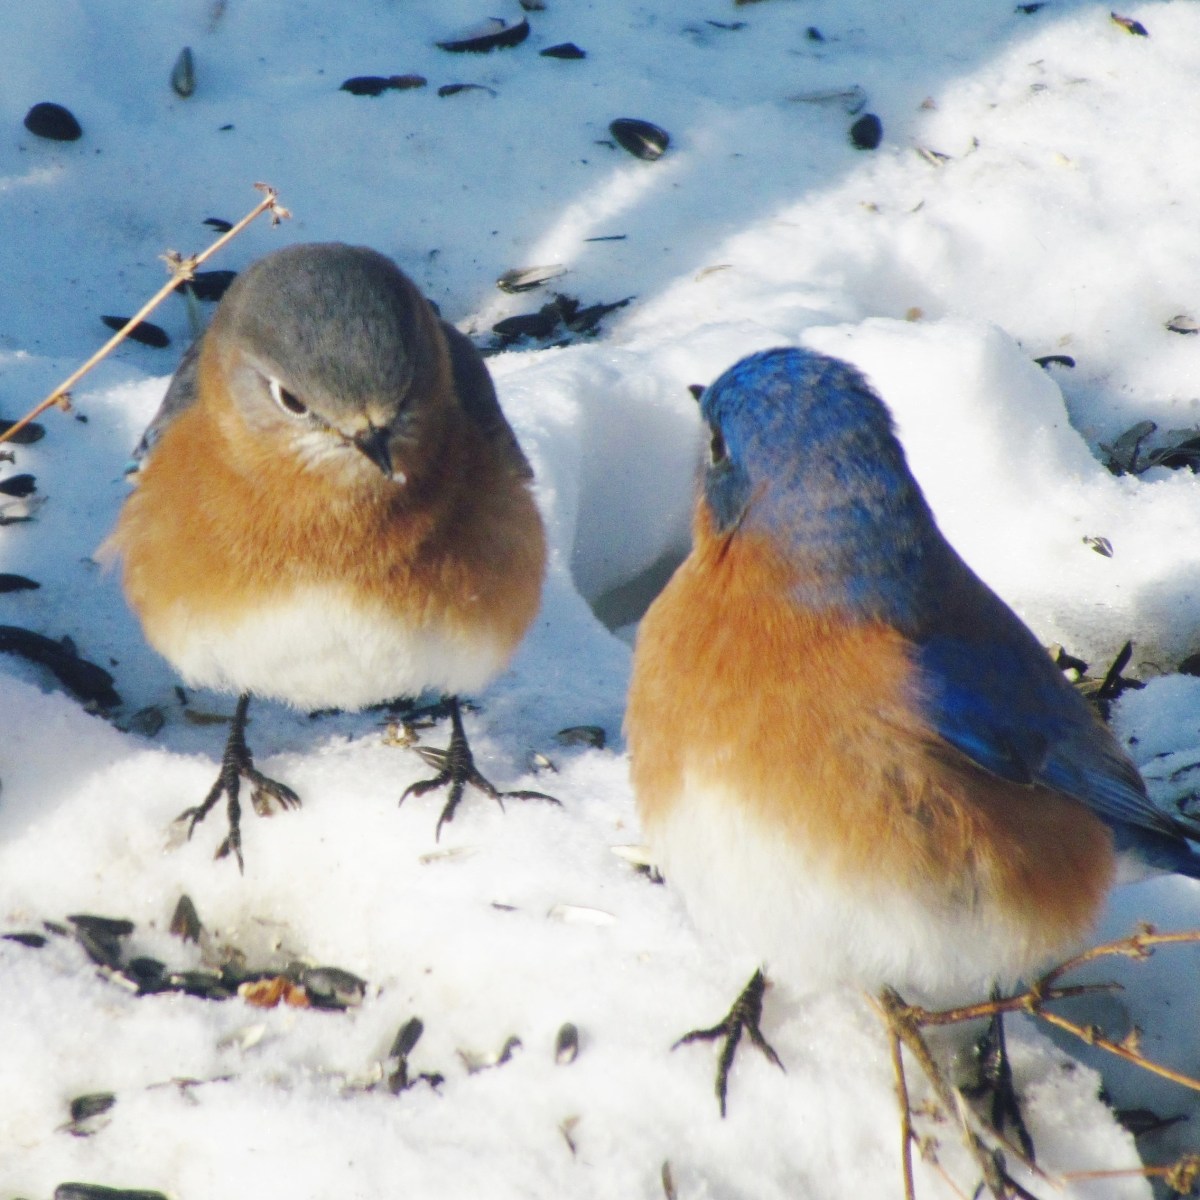 Two Eastern Bluebirds standing on snow